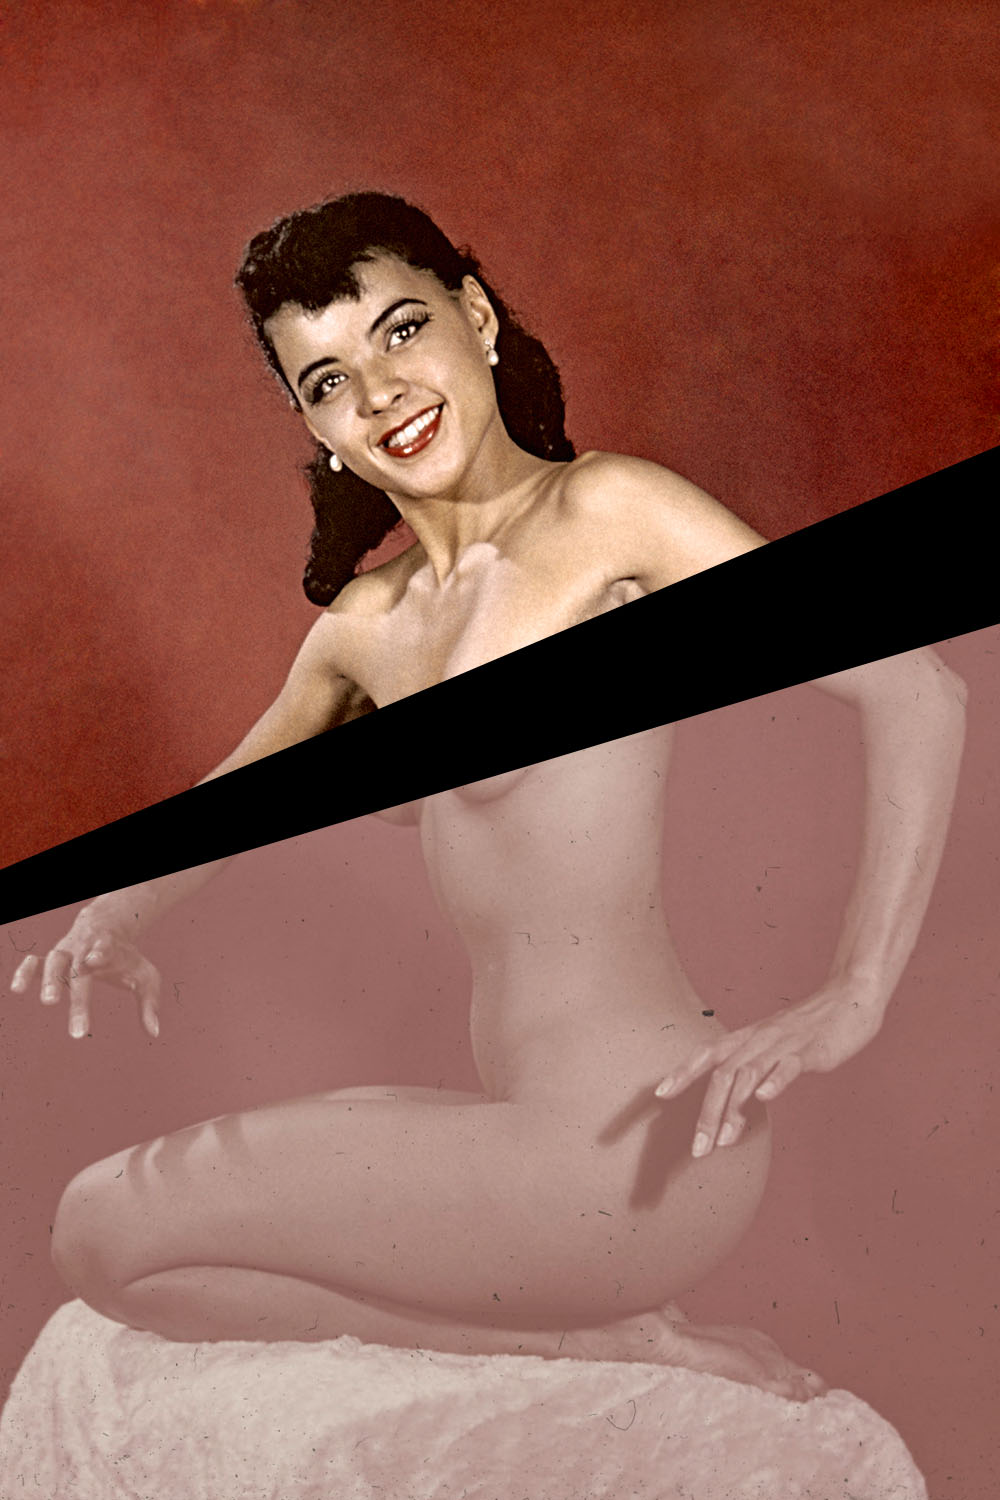 50s Nude - Nude Women of the 1950s - Restoring Pinups, Not Pornography